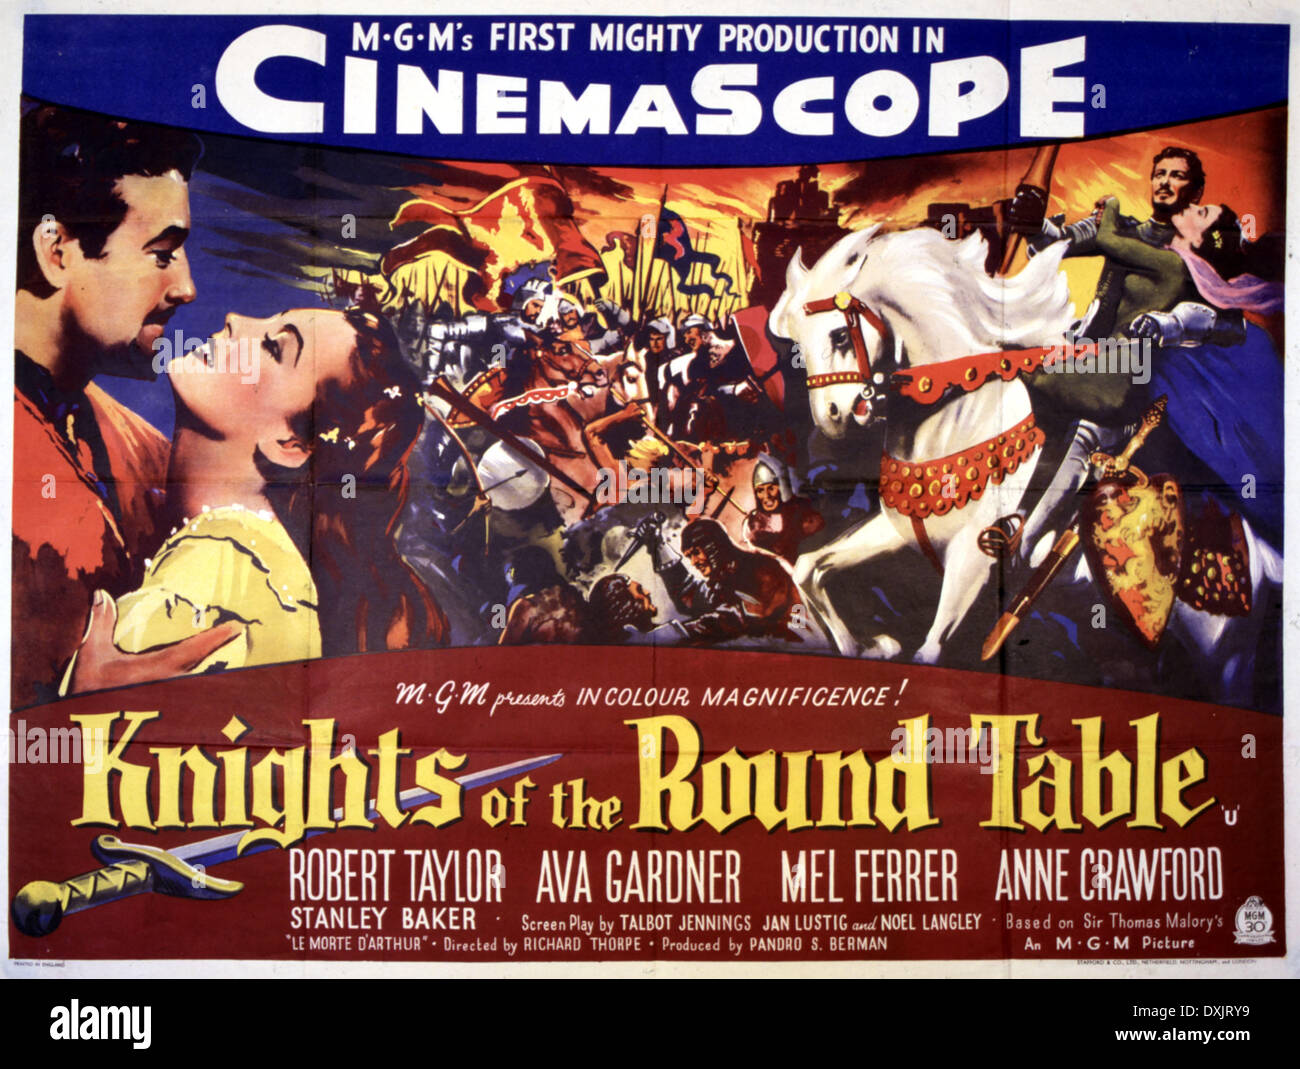 KNIGHTS OF THE ROUND TABLE (US1953) Stockfoto